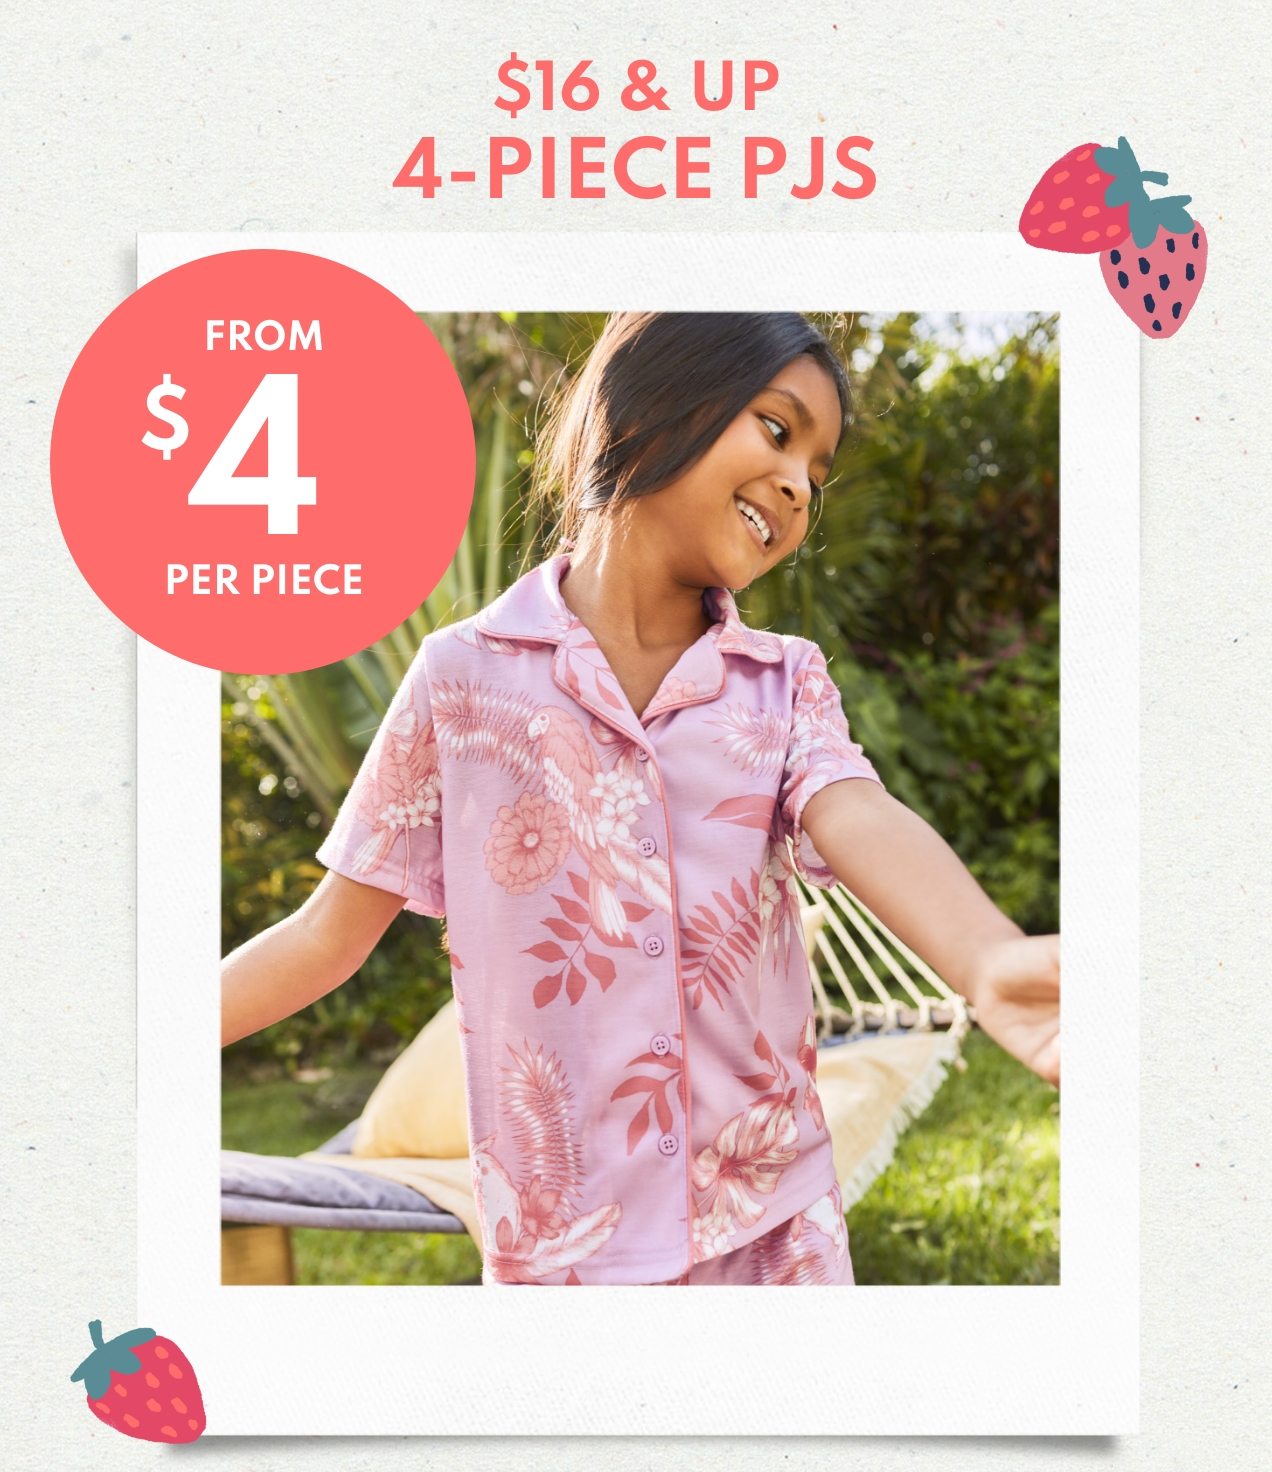 $16 & UP | 4-PIECE PJS | FROM $4 PER PIECE 